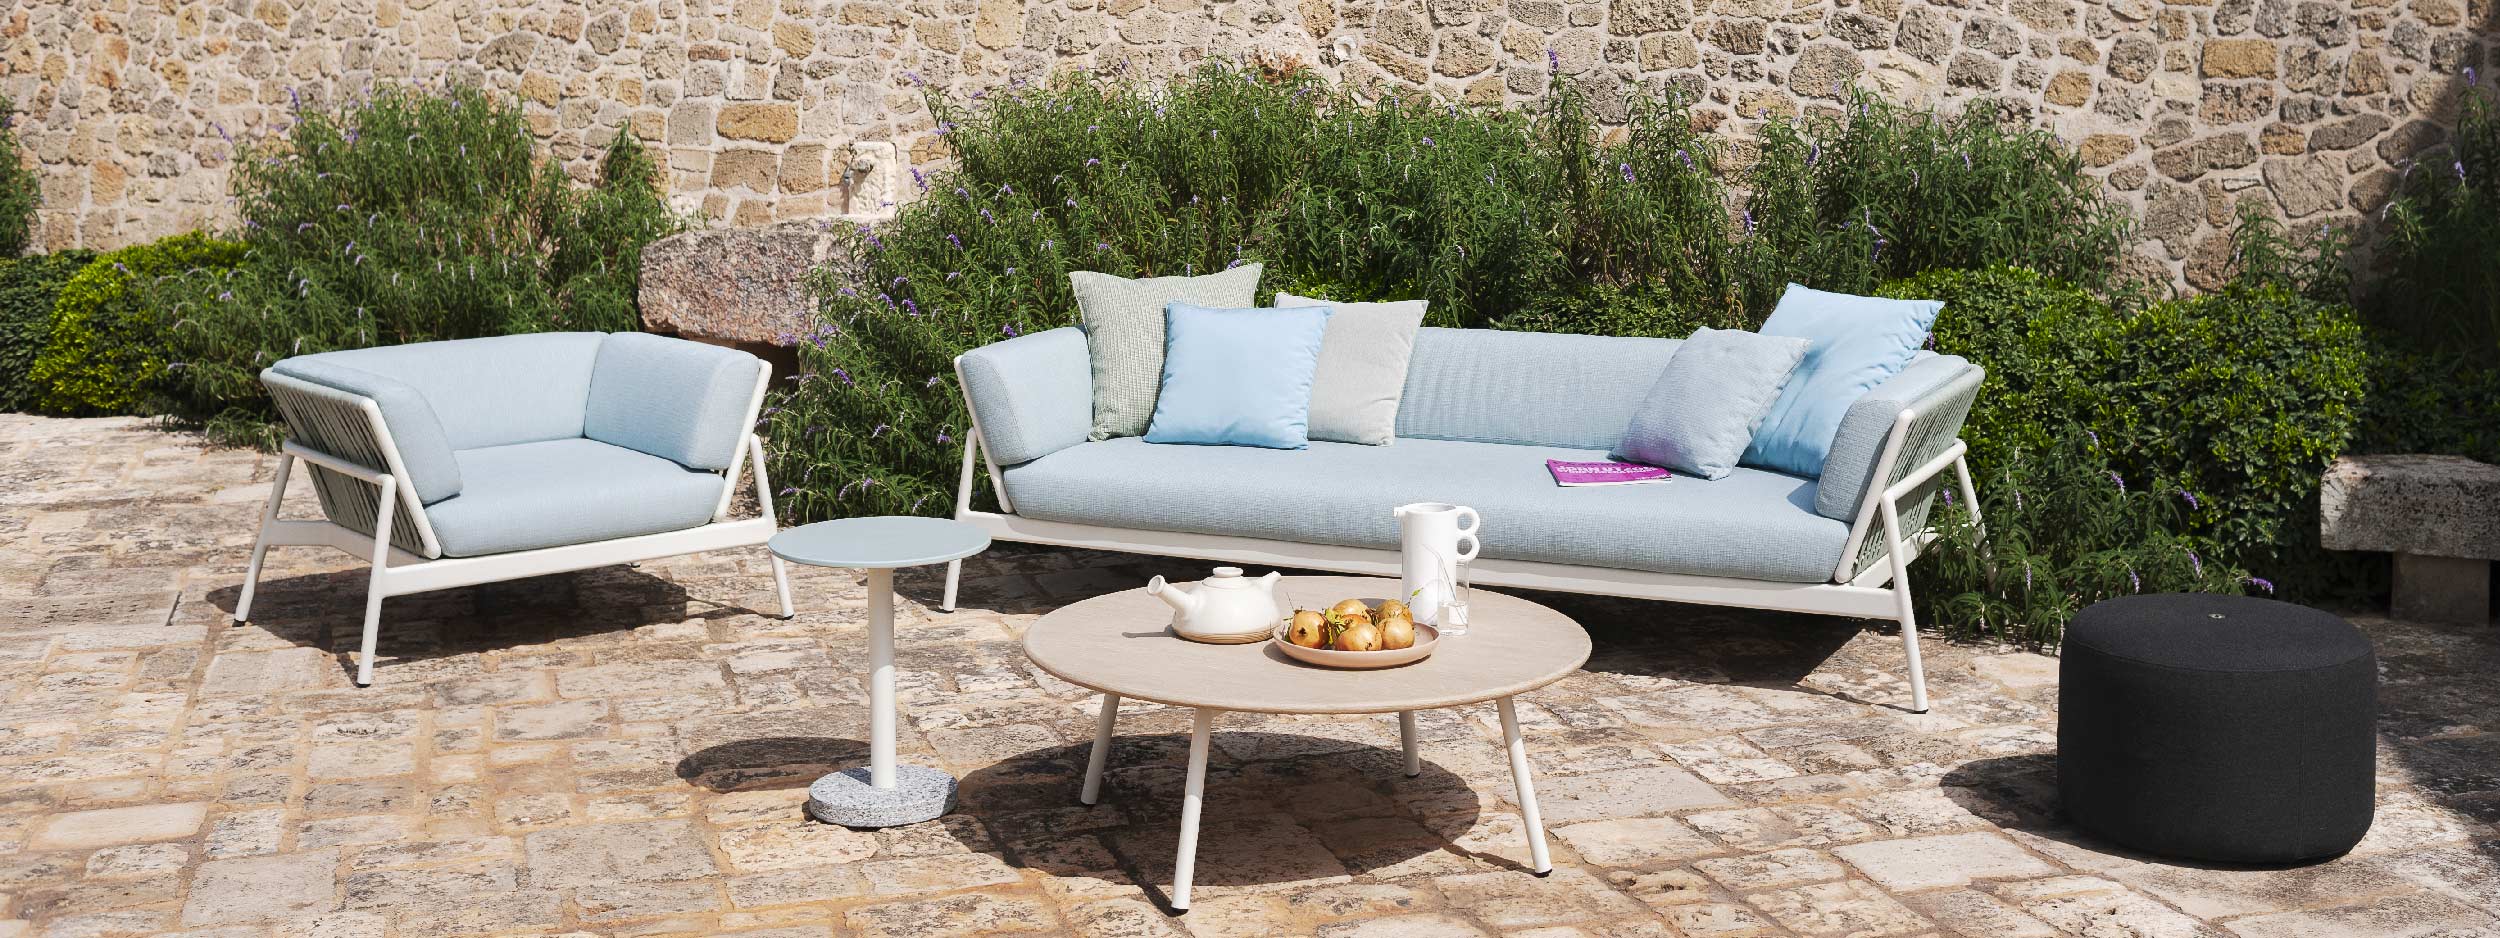 Image of Piper minimalist white garden sofa & low table on sunny rustic terrace